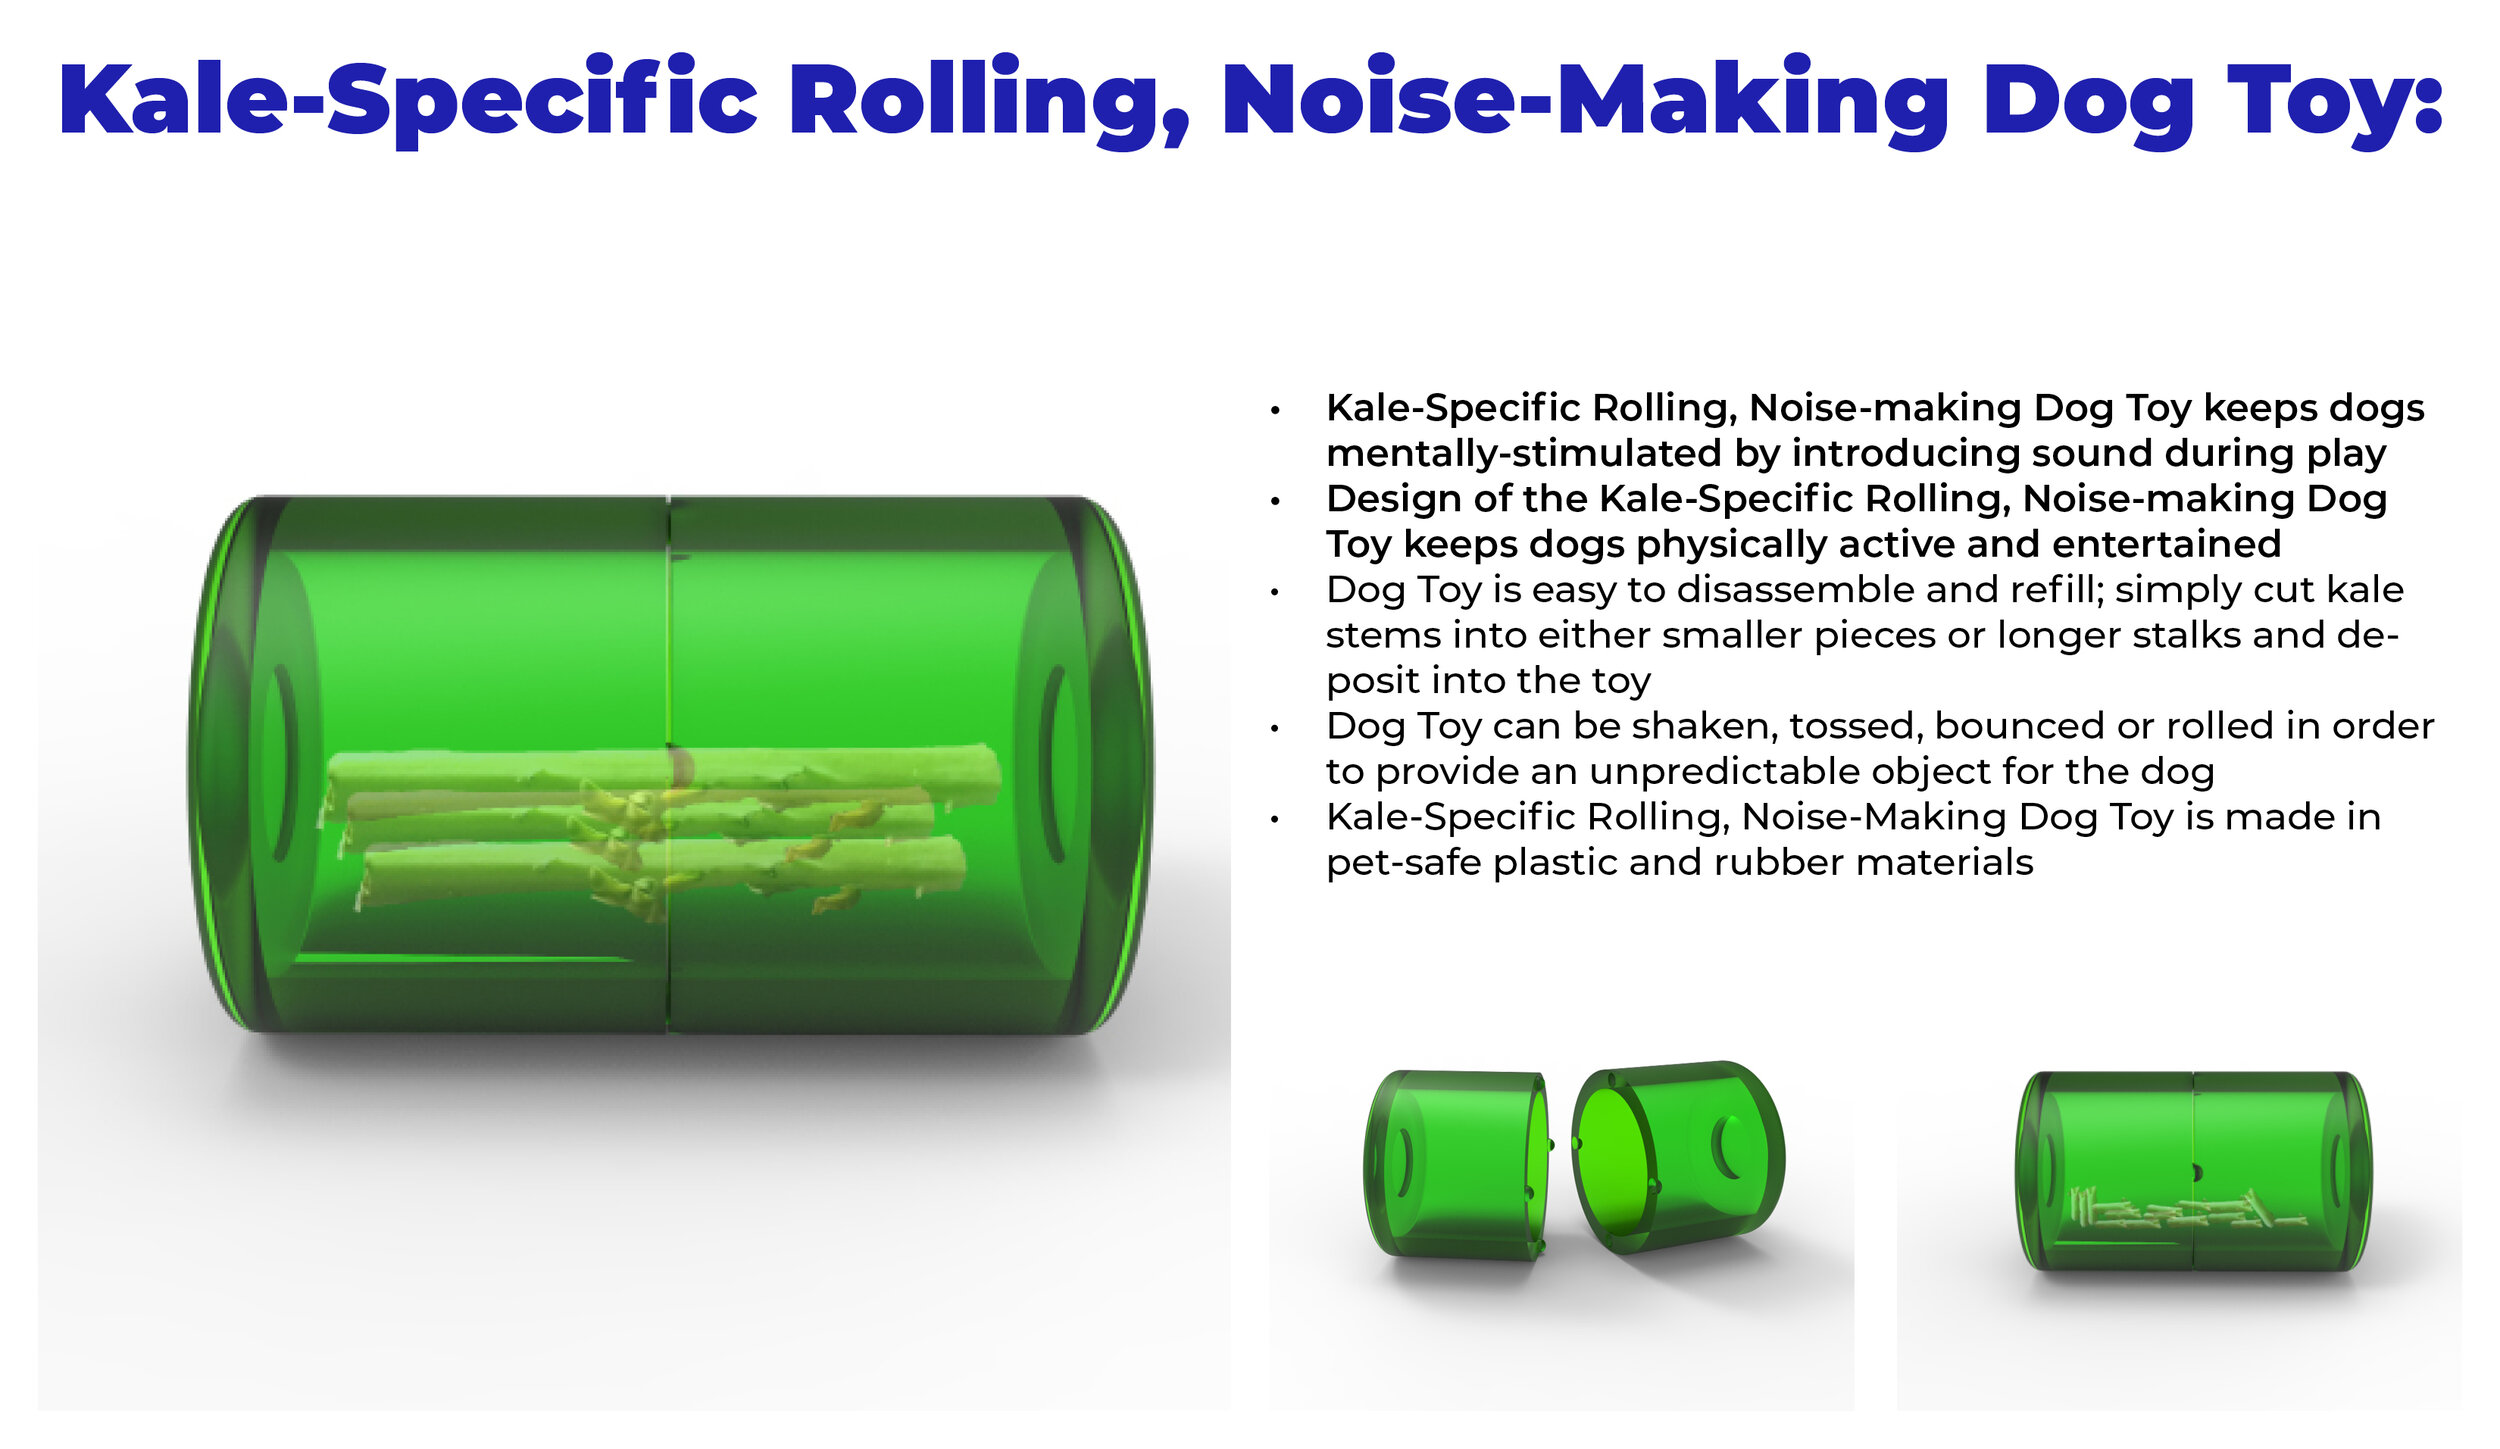 Kale-Specific Rolling, Noise-Making Dog Toy, Final Rendering